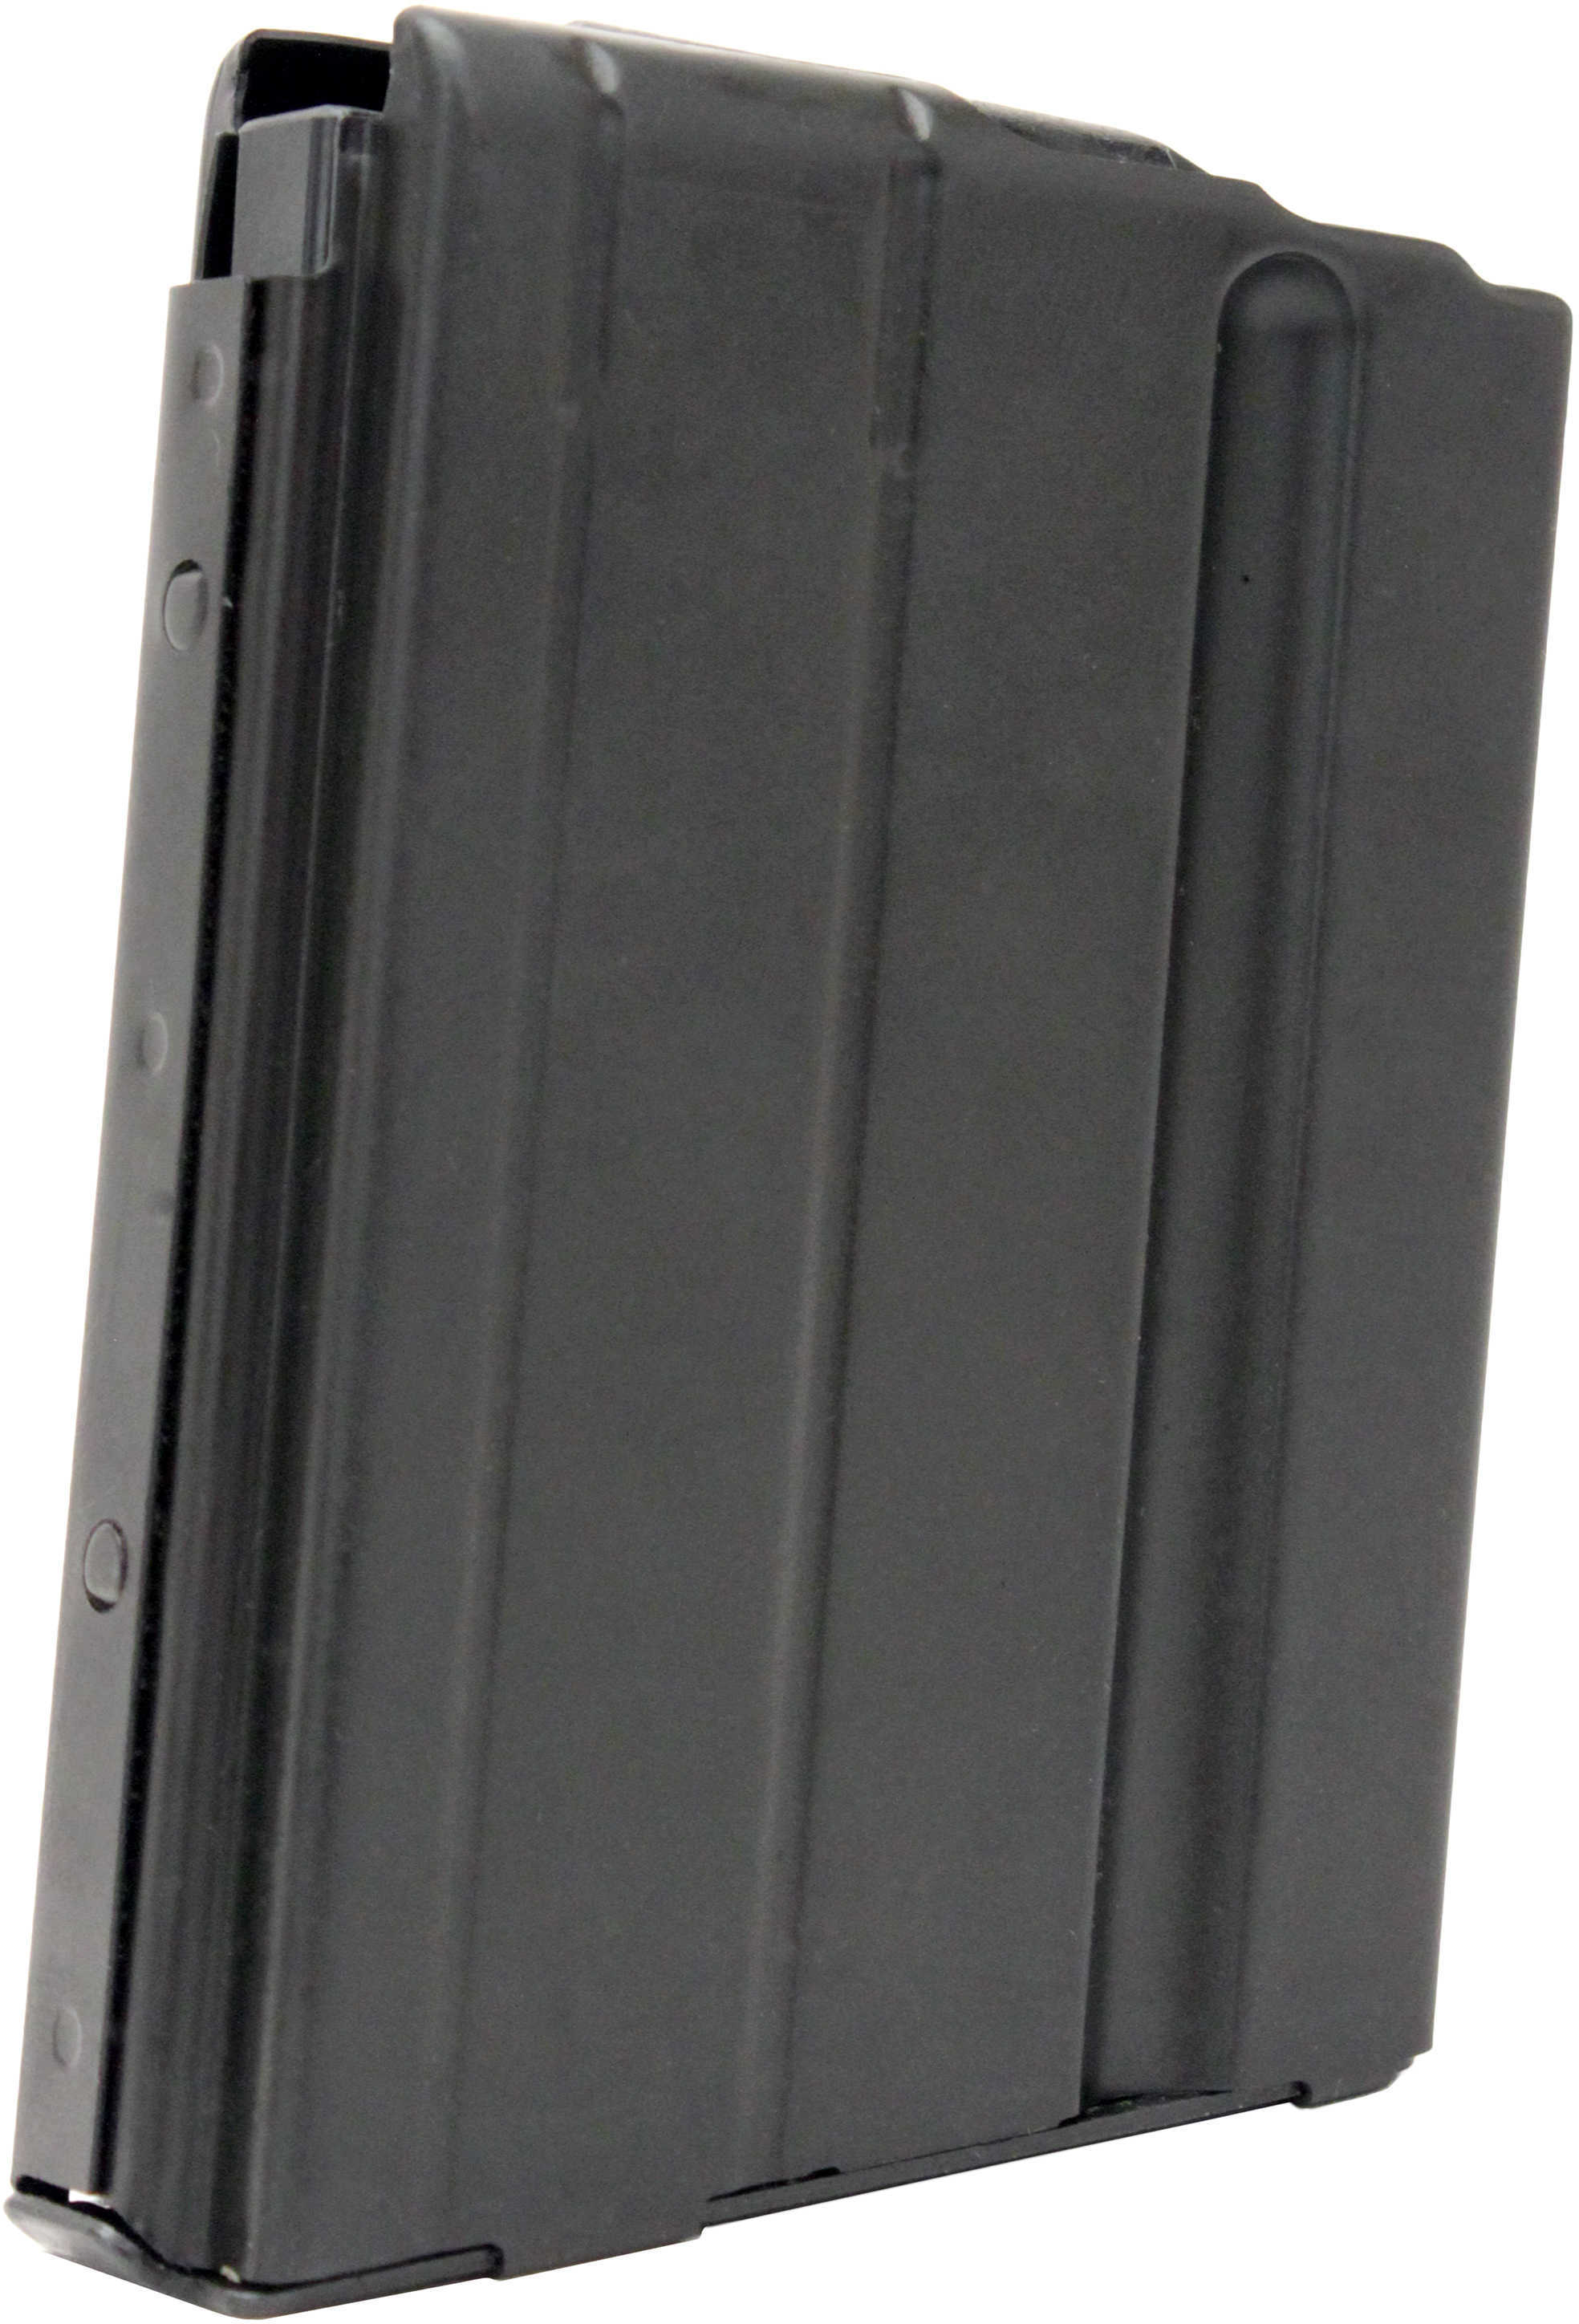 C Products Defense Cpd Magazine AR15 7.62X39 10 Rounds Blackened Stainless Steel